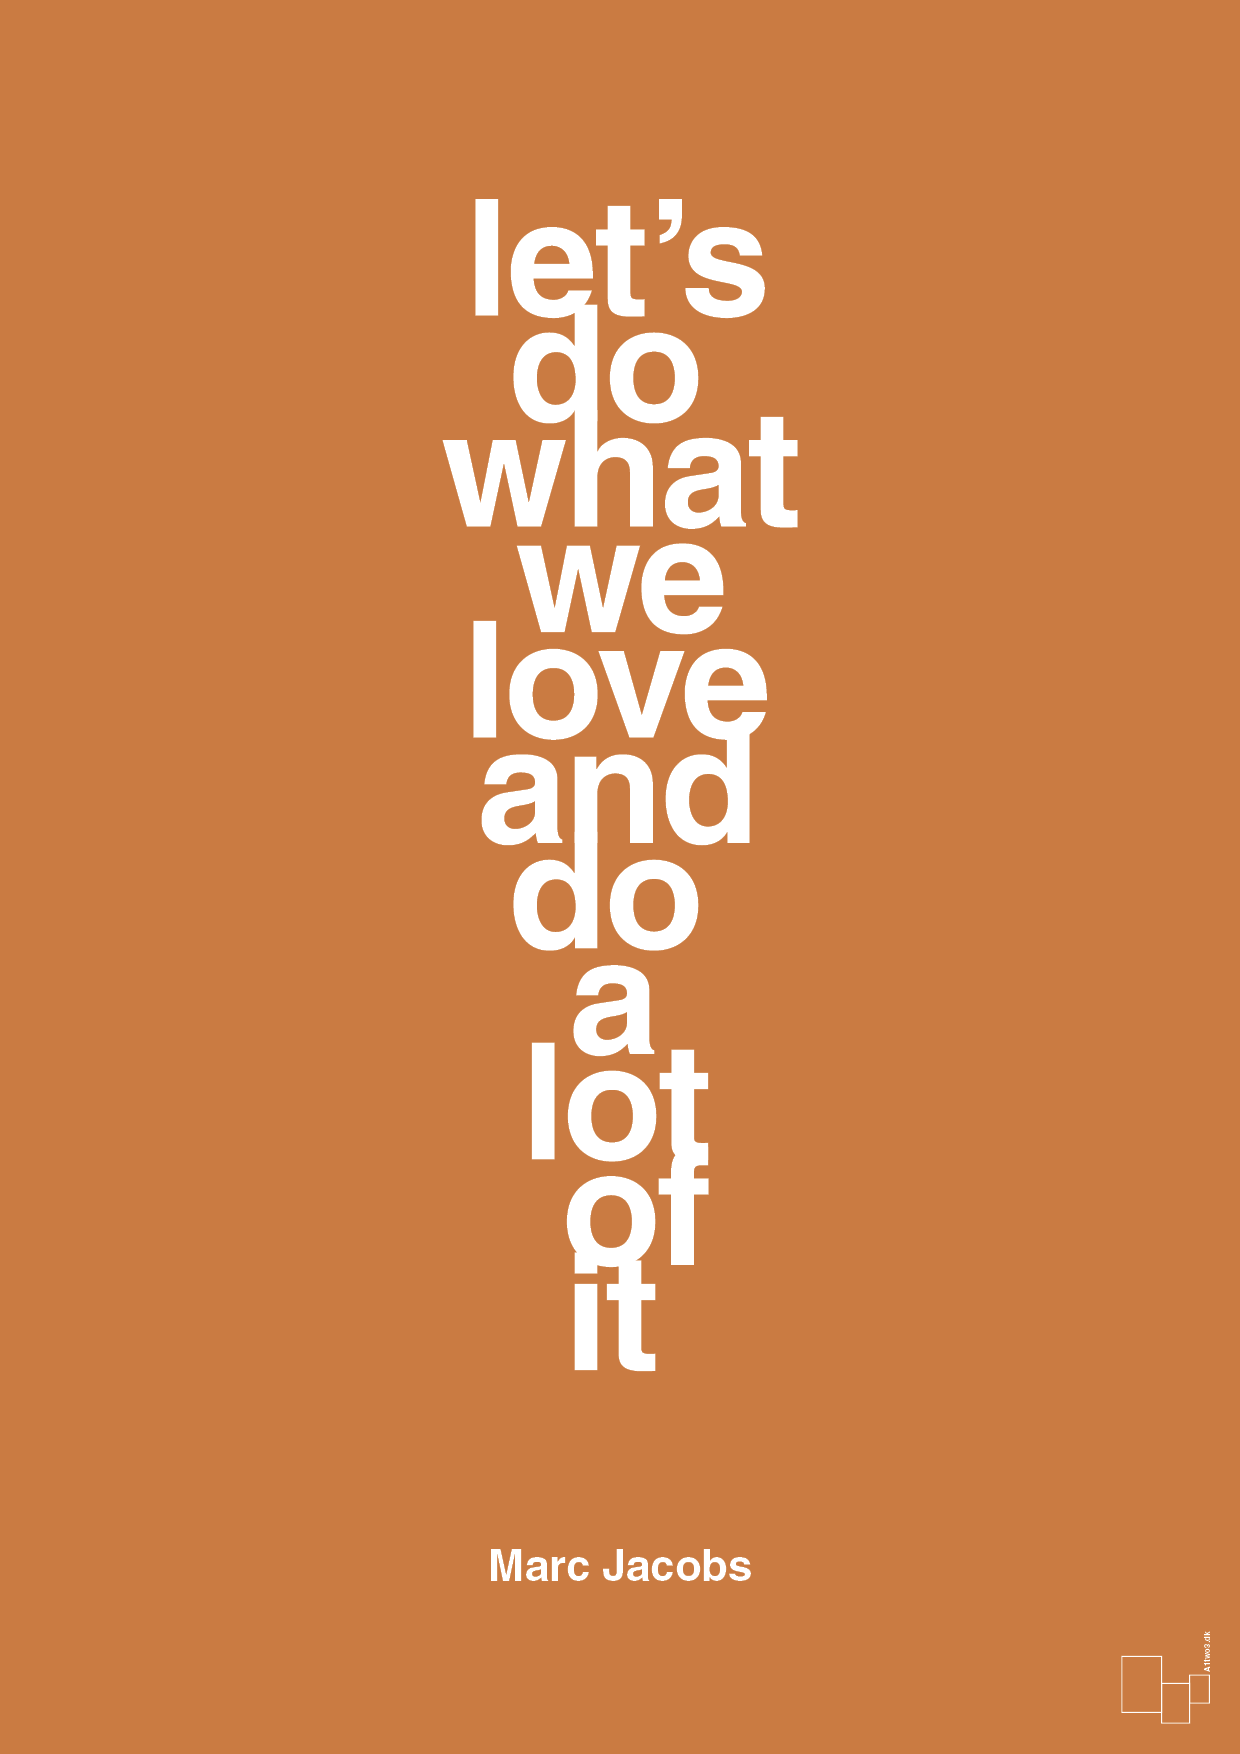 lets do what we love and do a lot of it - Plakat med Citater i Rumba Orange